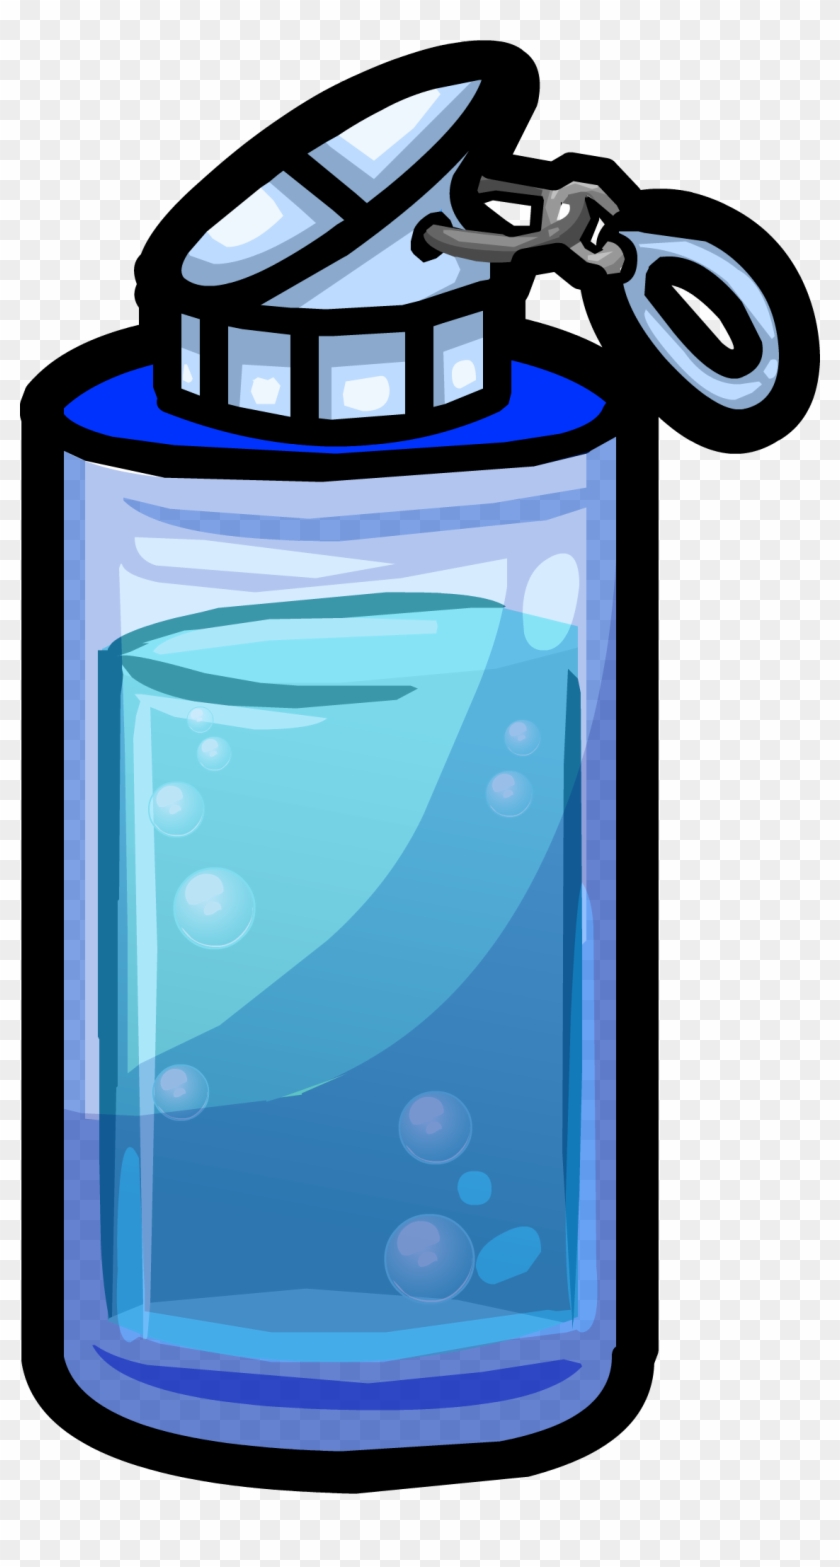 Image - Reusable Water Bottle Clipart - Png Download #39388